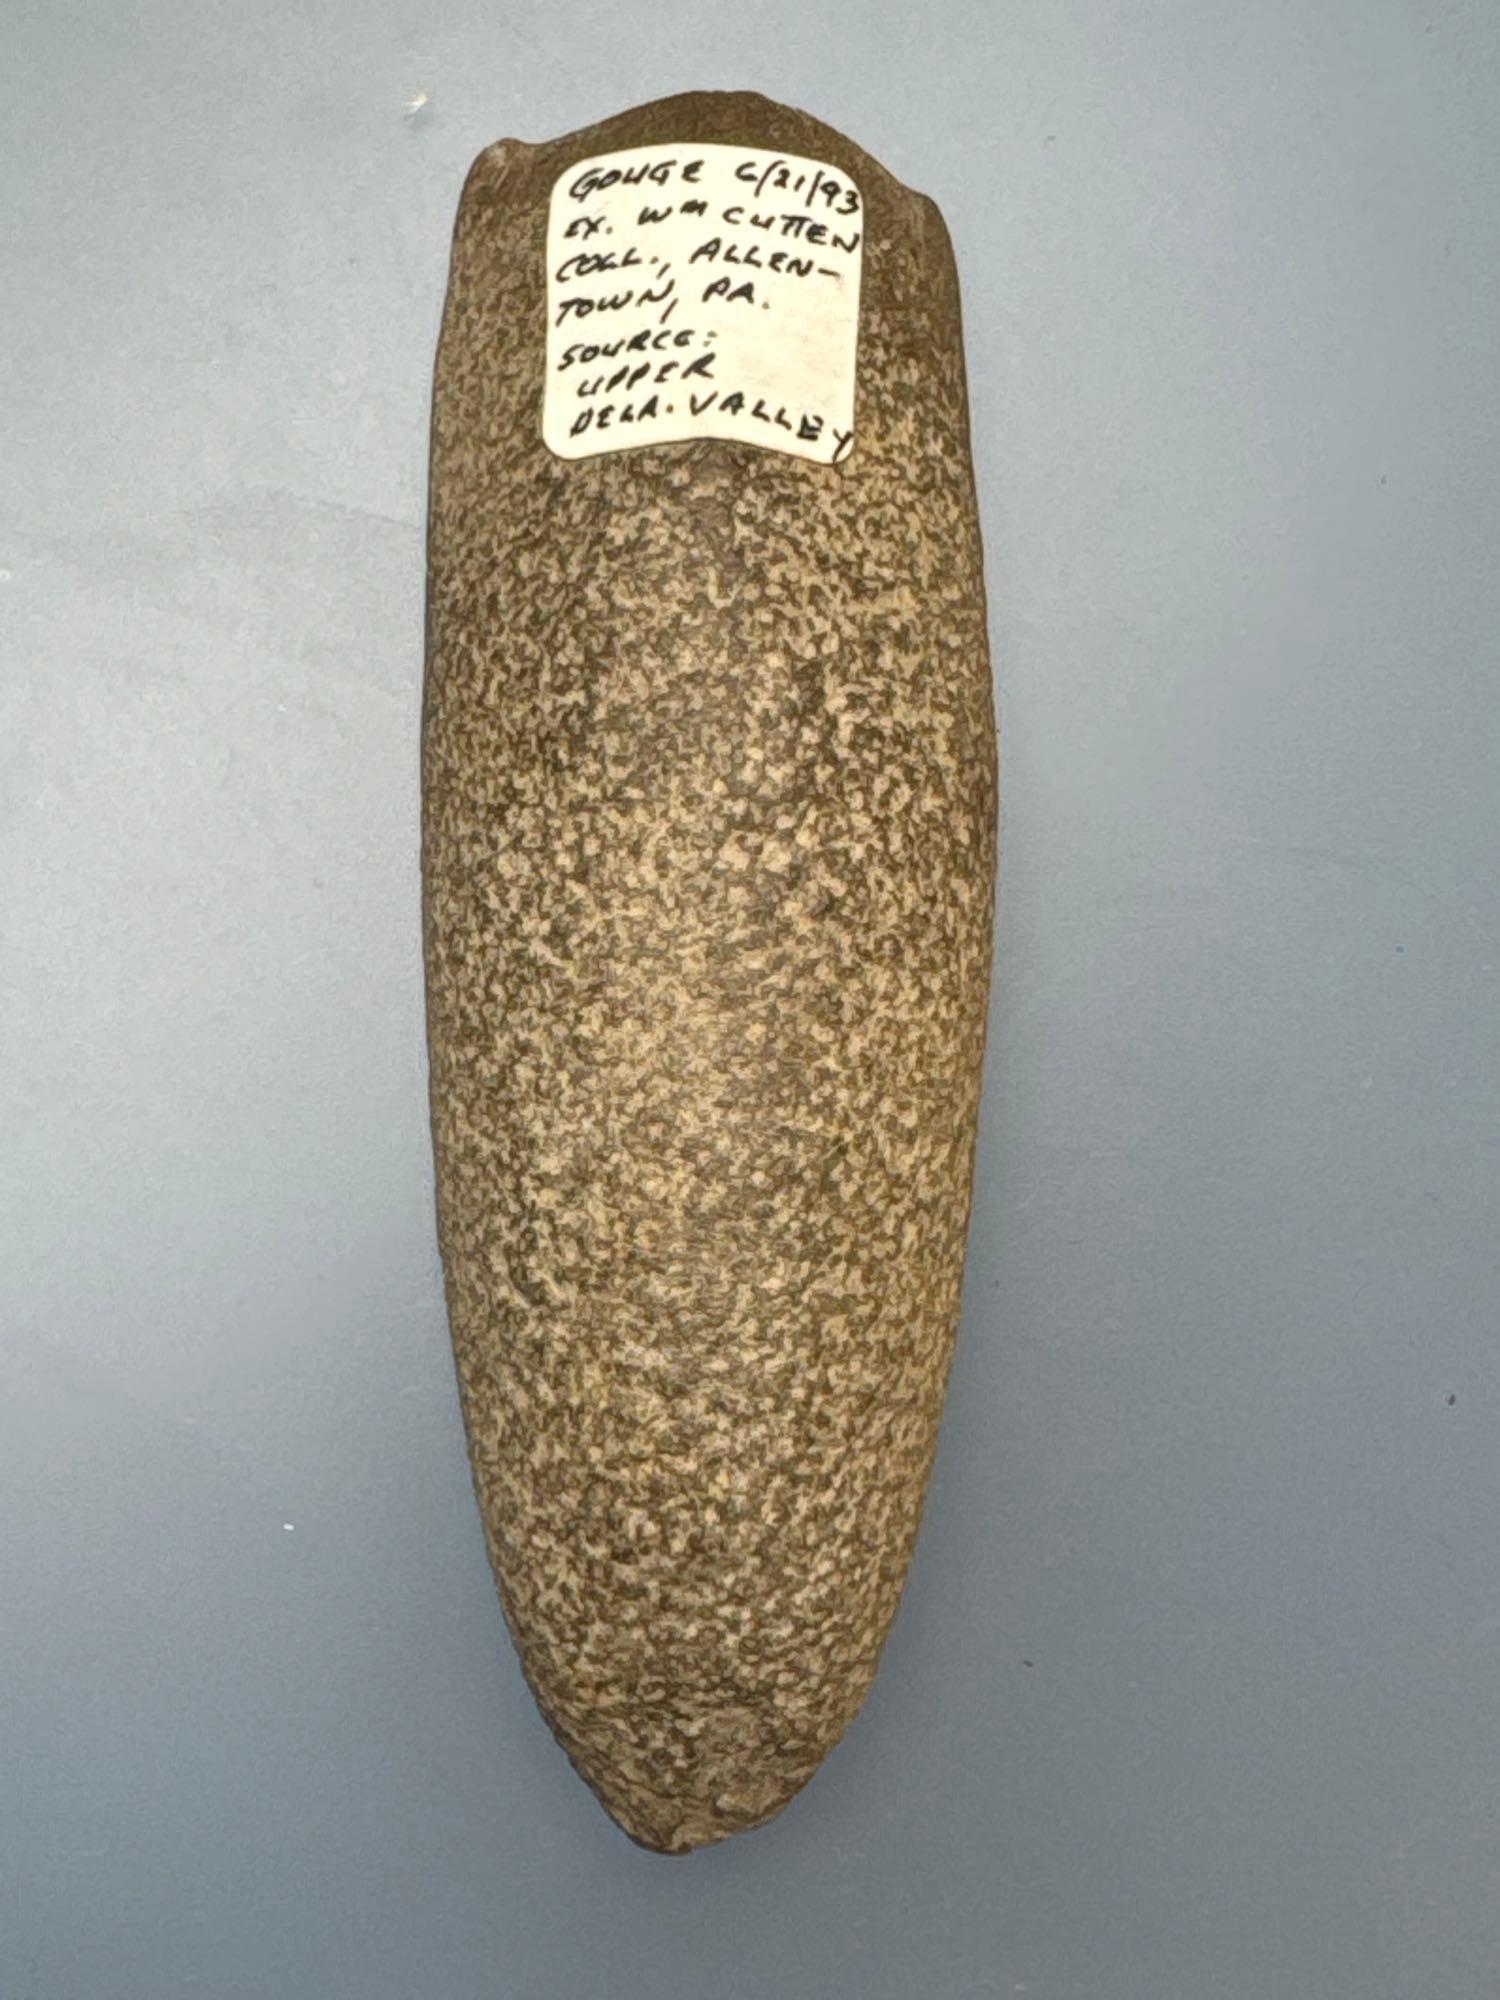 5" Stunning Humped Gouge, Found in Upper Delaware River Valley, From the Cutten Collection of Allent